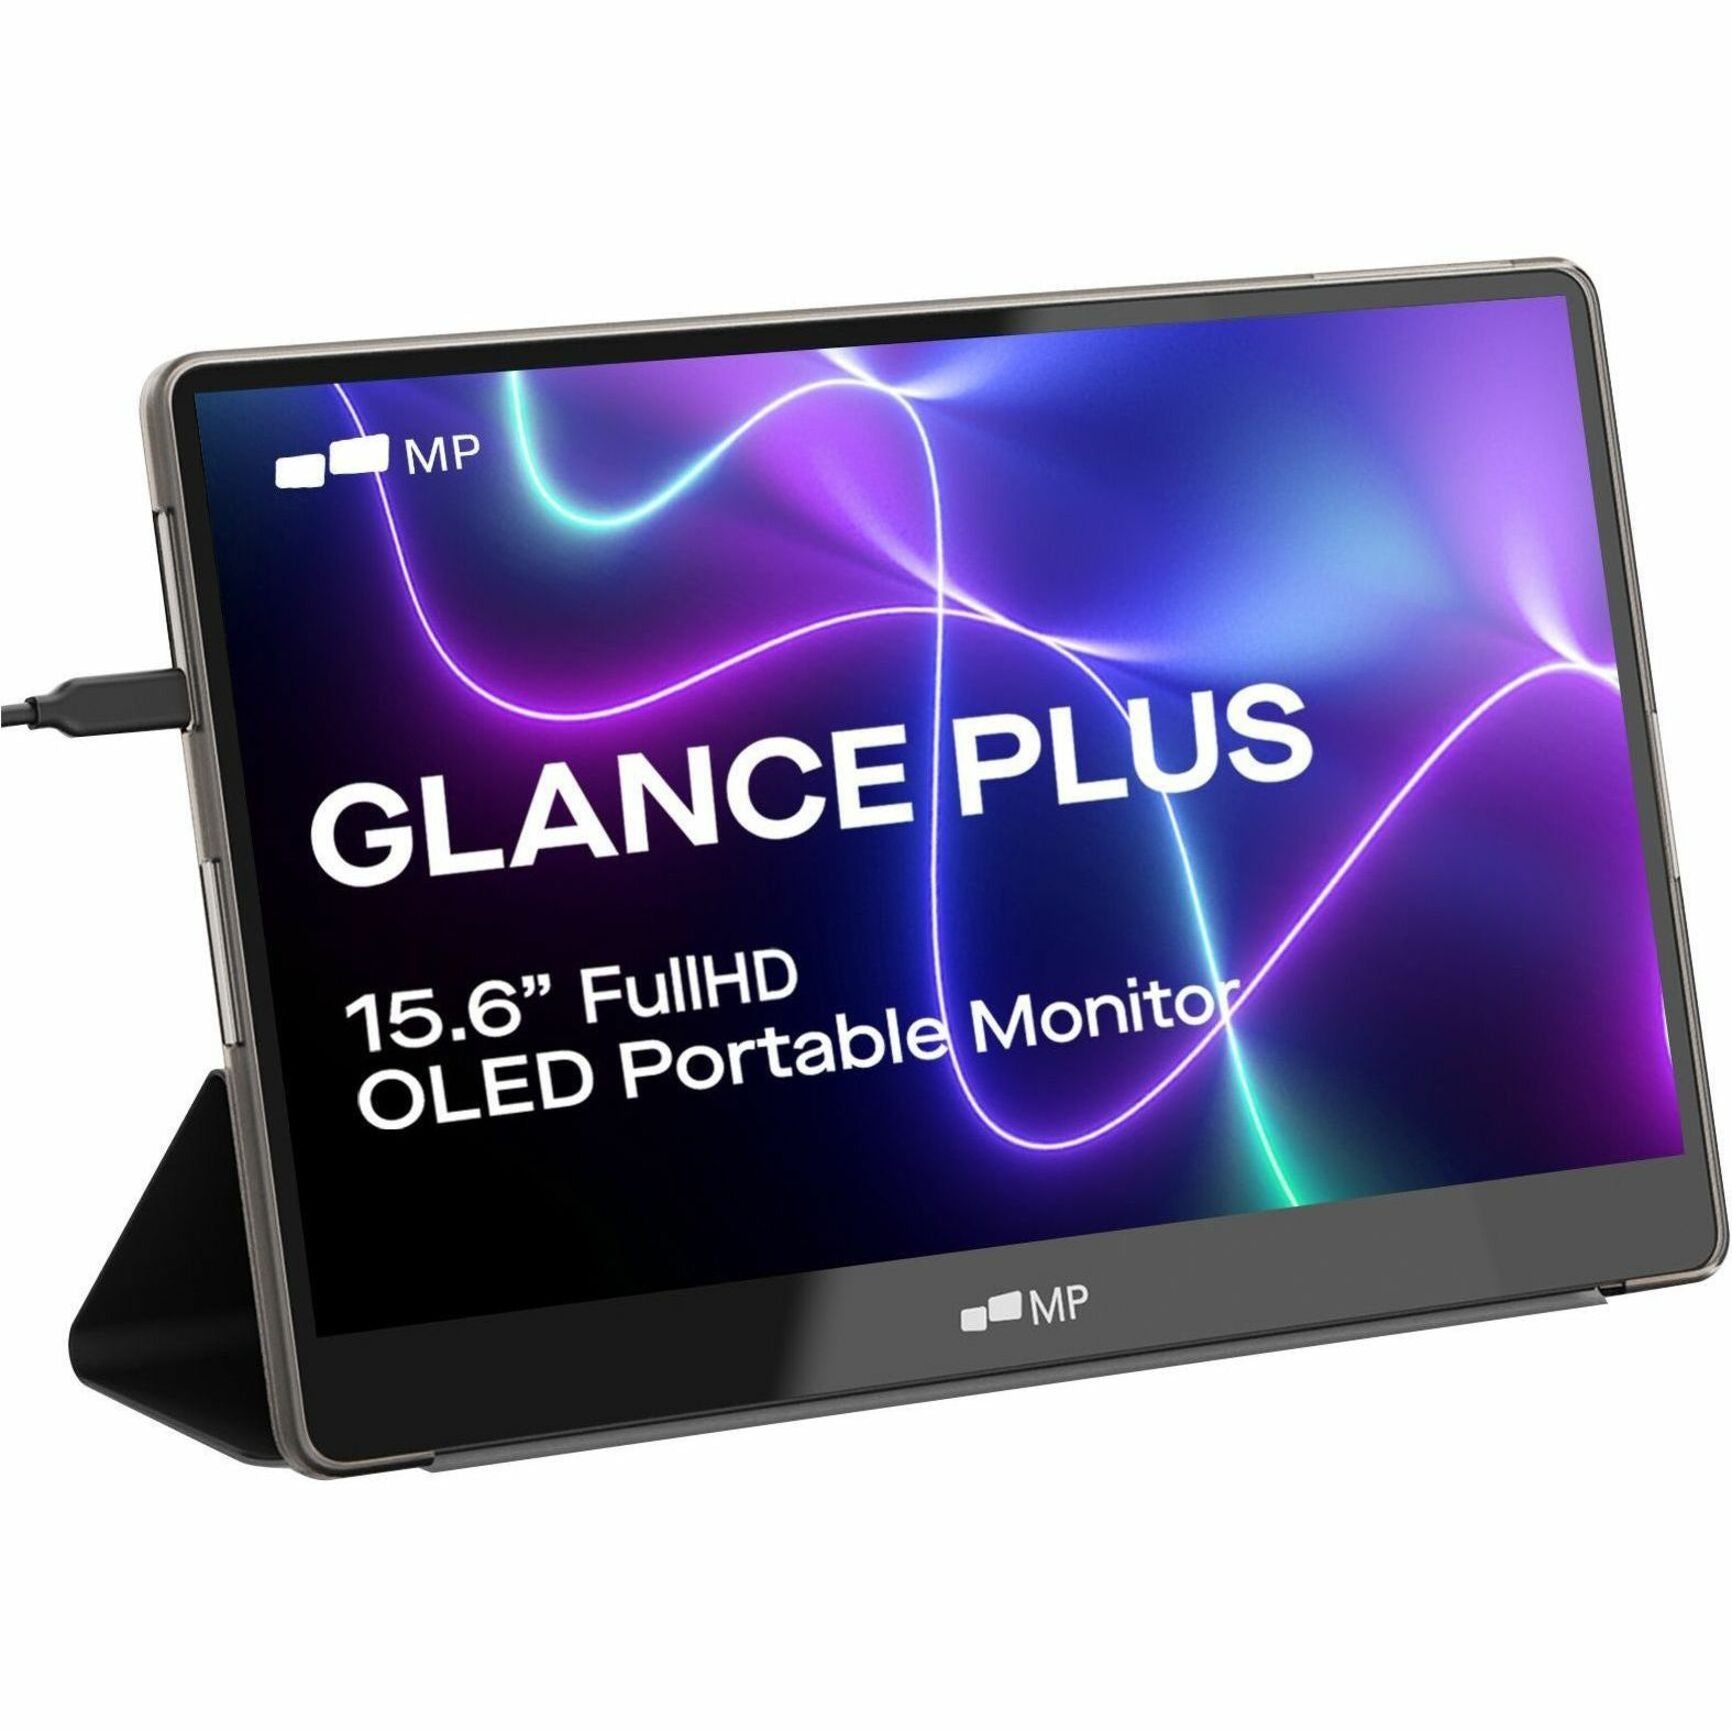 Mobile Pixels 101-1012P01 Glance Plus OLED Monitor, Full HD, 16:9, 16" Viewable Screen Size, 400 Nit Brightness, 100% DCI-P3 Color Gamut